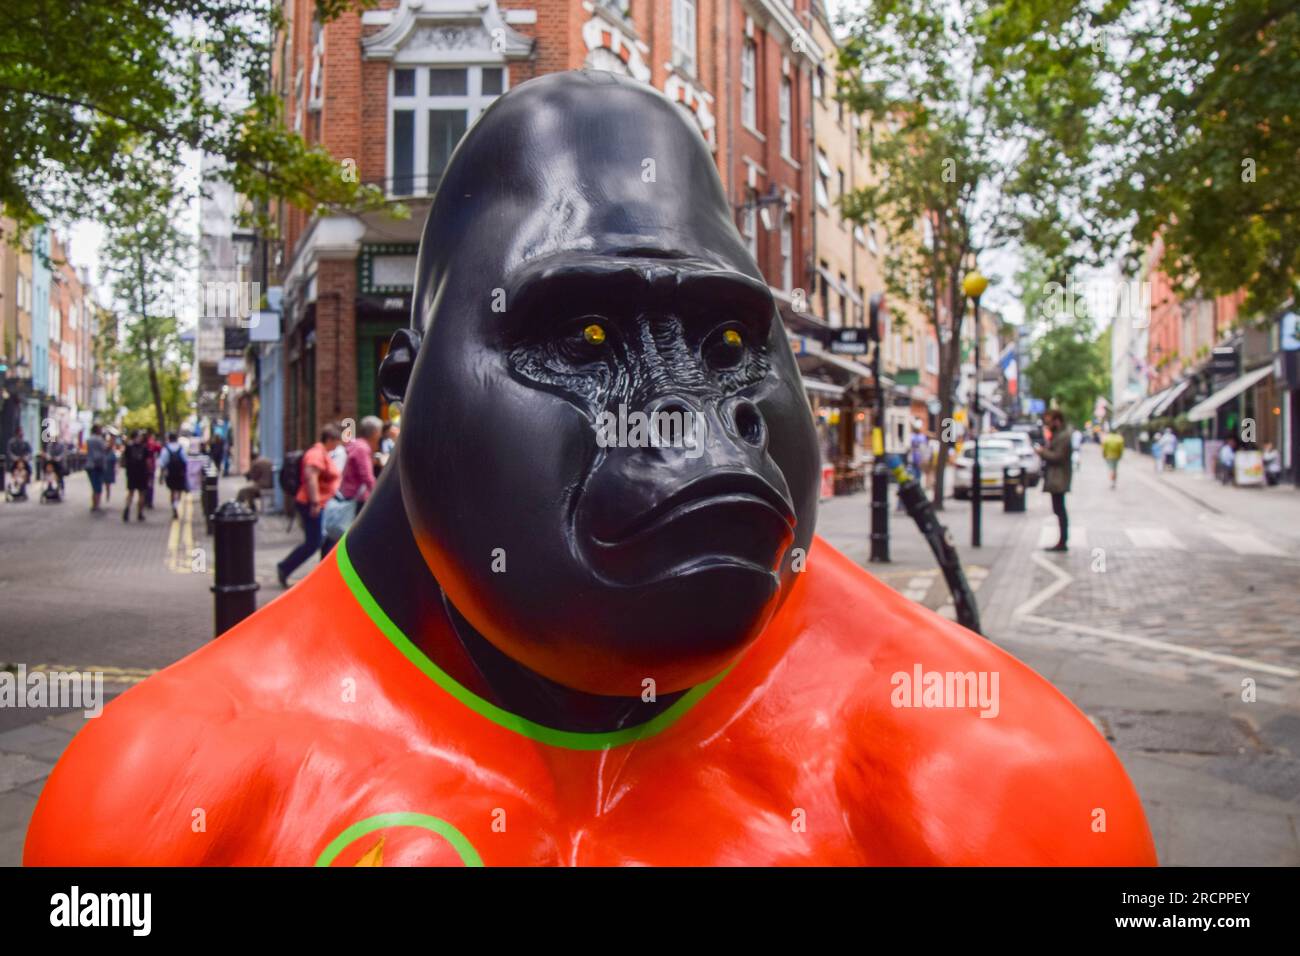 Why a Trail of Life-Size Gorilla Sculptures Popped Up in London, Smart  News